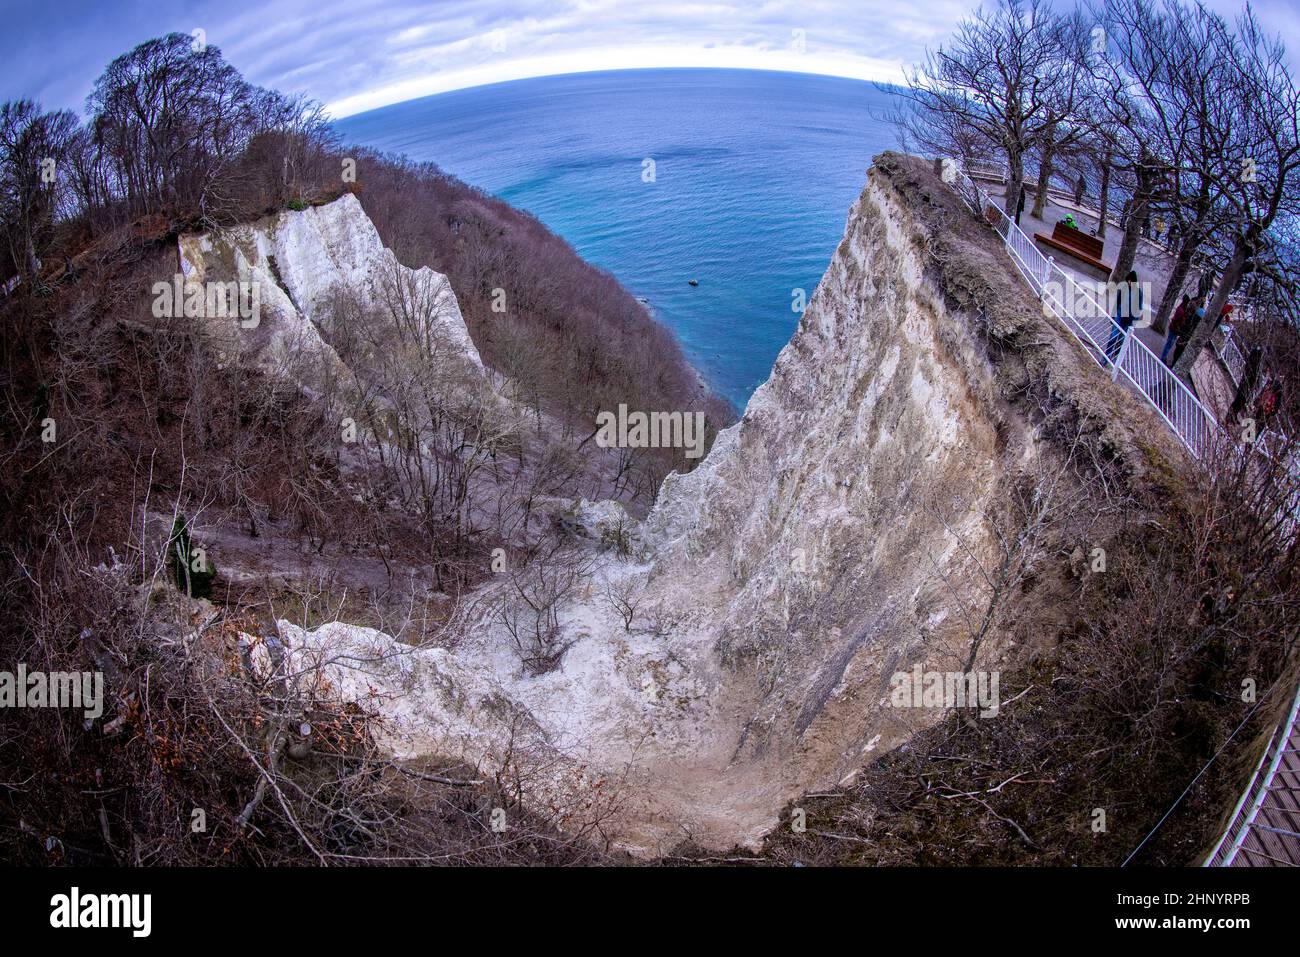 15 February 2022, Mecklenburg-Western Pomerania, Sassnitz: Visitors walk up a staircase to the Königsstuhl viewing platform on the chalk coast of the island of Rügen, which is only open until the end of April 2022. (Exception with extreme wide-angle lens) Behind it, parts of the chalk coast and the beech forest can be seen. To protect the 118 meter high chalk cliff on the Baltic Sea, visitors will in future be able to admire the view from an oval 185 meter long bridge circuit above the cliff. The new steel structure is to have a load capacity of 163 tons and be able to accommodate up to 1,100 Stock Photo